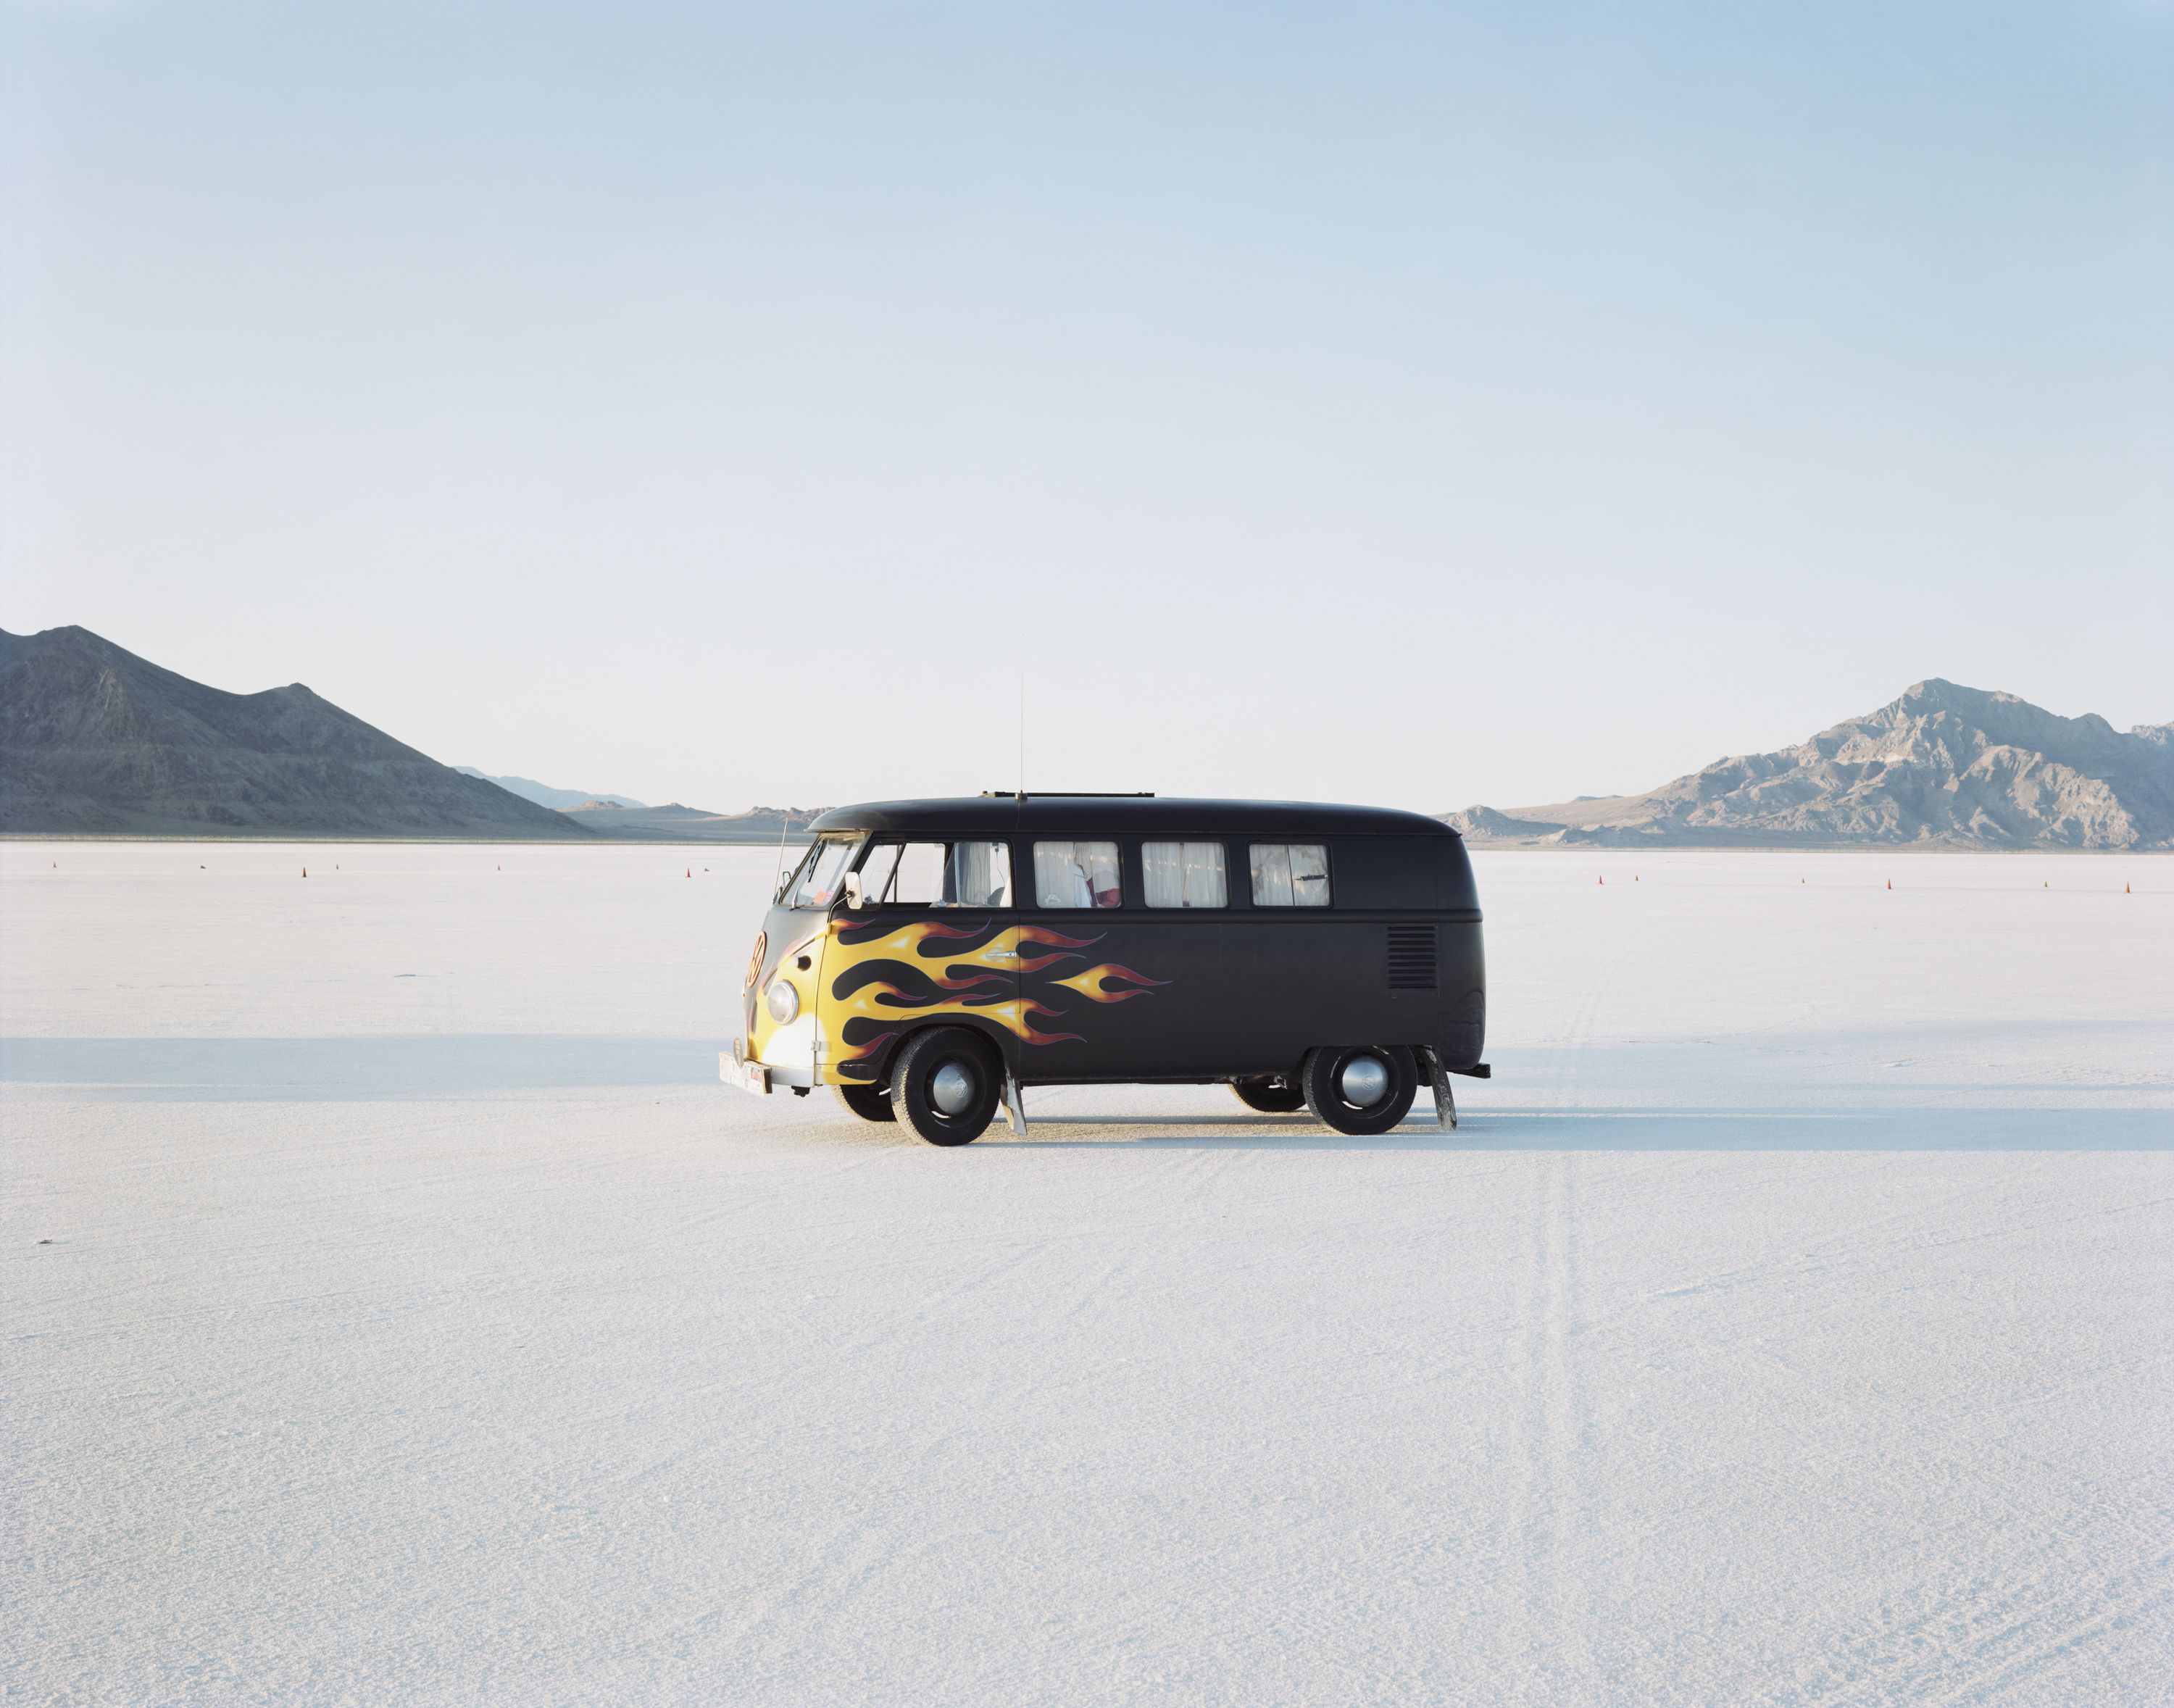 Color photograph of a VW bus with flames painted on the front in the middle of empty slat flats with mountains on horizon